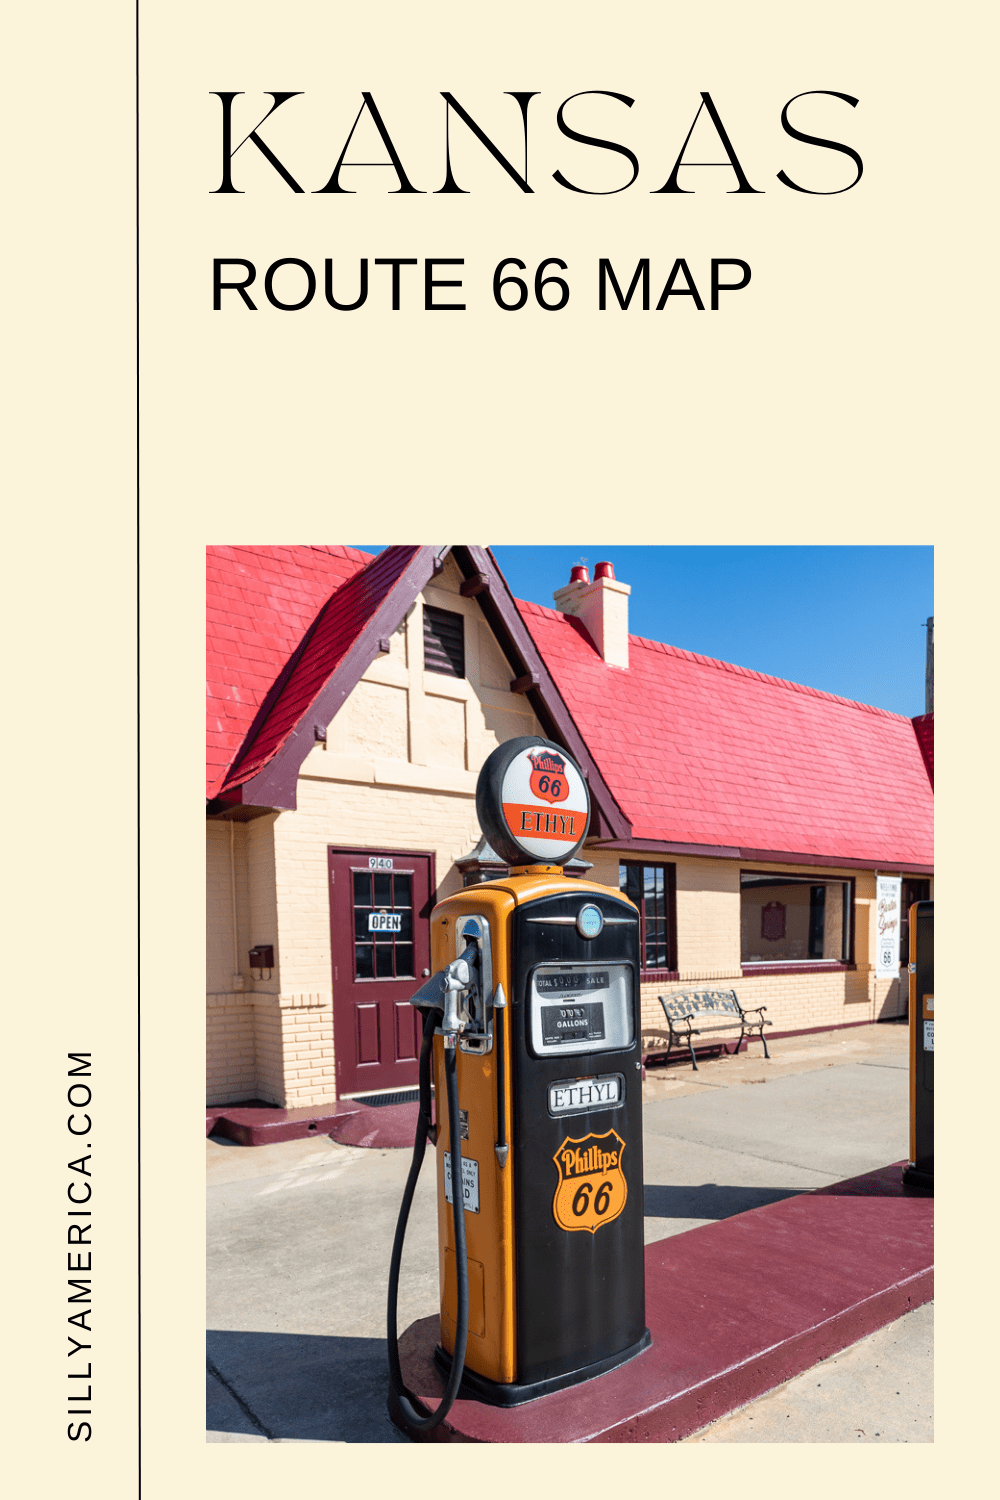 If you're planning a Route 66 road trip you need to know what to see and where to go. Our Kansas Route 66 map contains all the best stops in the state. We've mapped out all the biggest and best roadside attractions, visitor centers, museums, parks, themed gas stations, restaurants, and other iconic stops on this Route 66 Kansas map. #Route66 #Kansas #Route66RoadTrip #KansasRoute66 #KansasRoute66RoadTrip #KansasRoadTrip #travel #RoadTrip